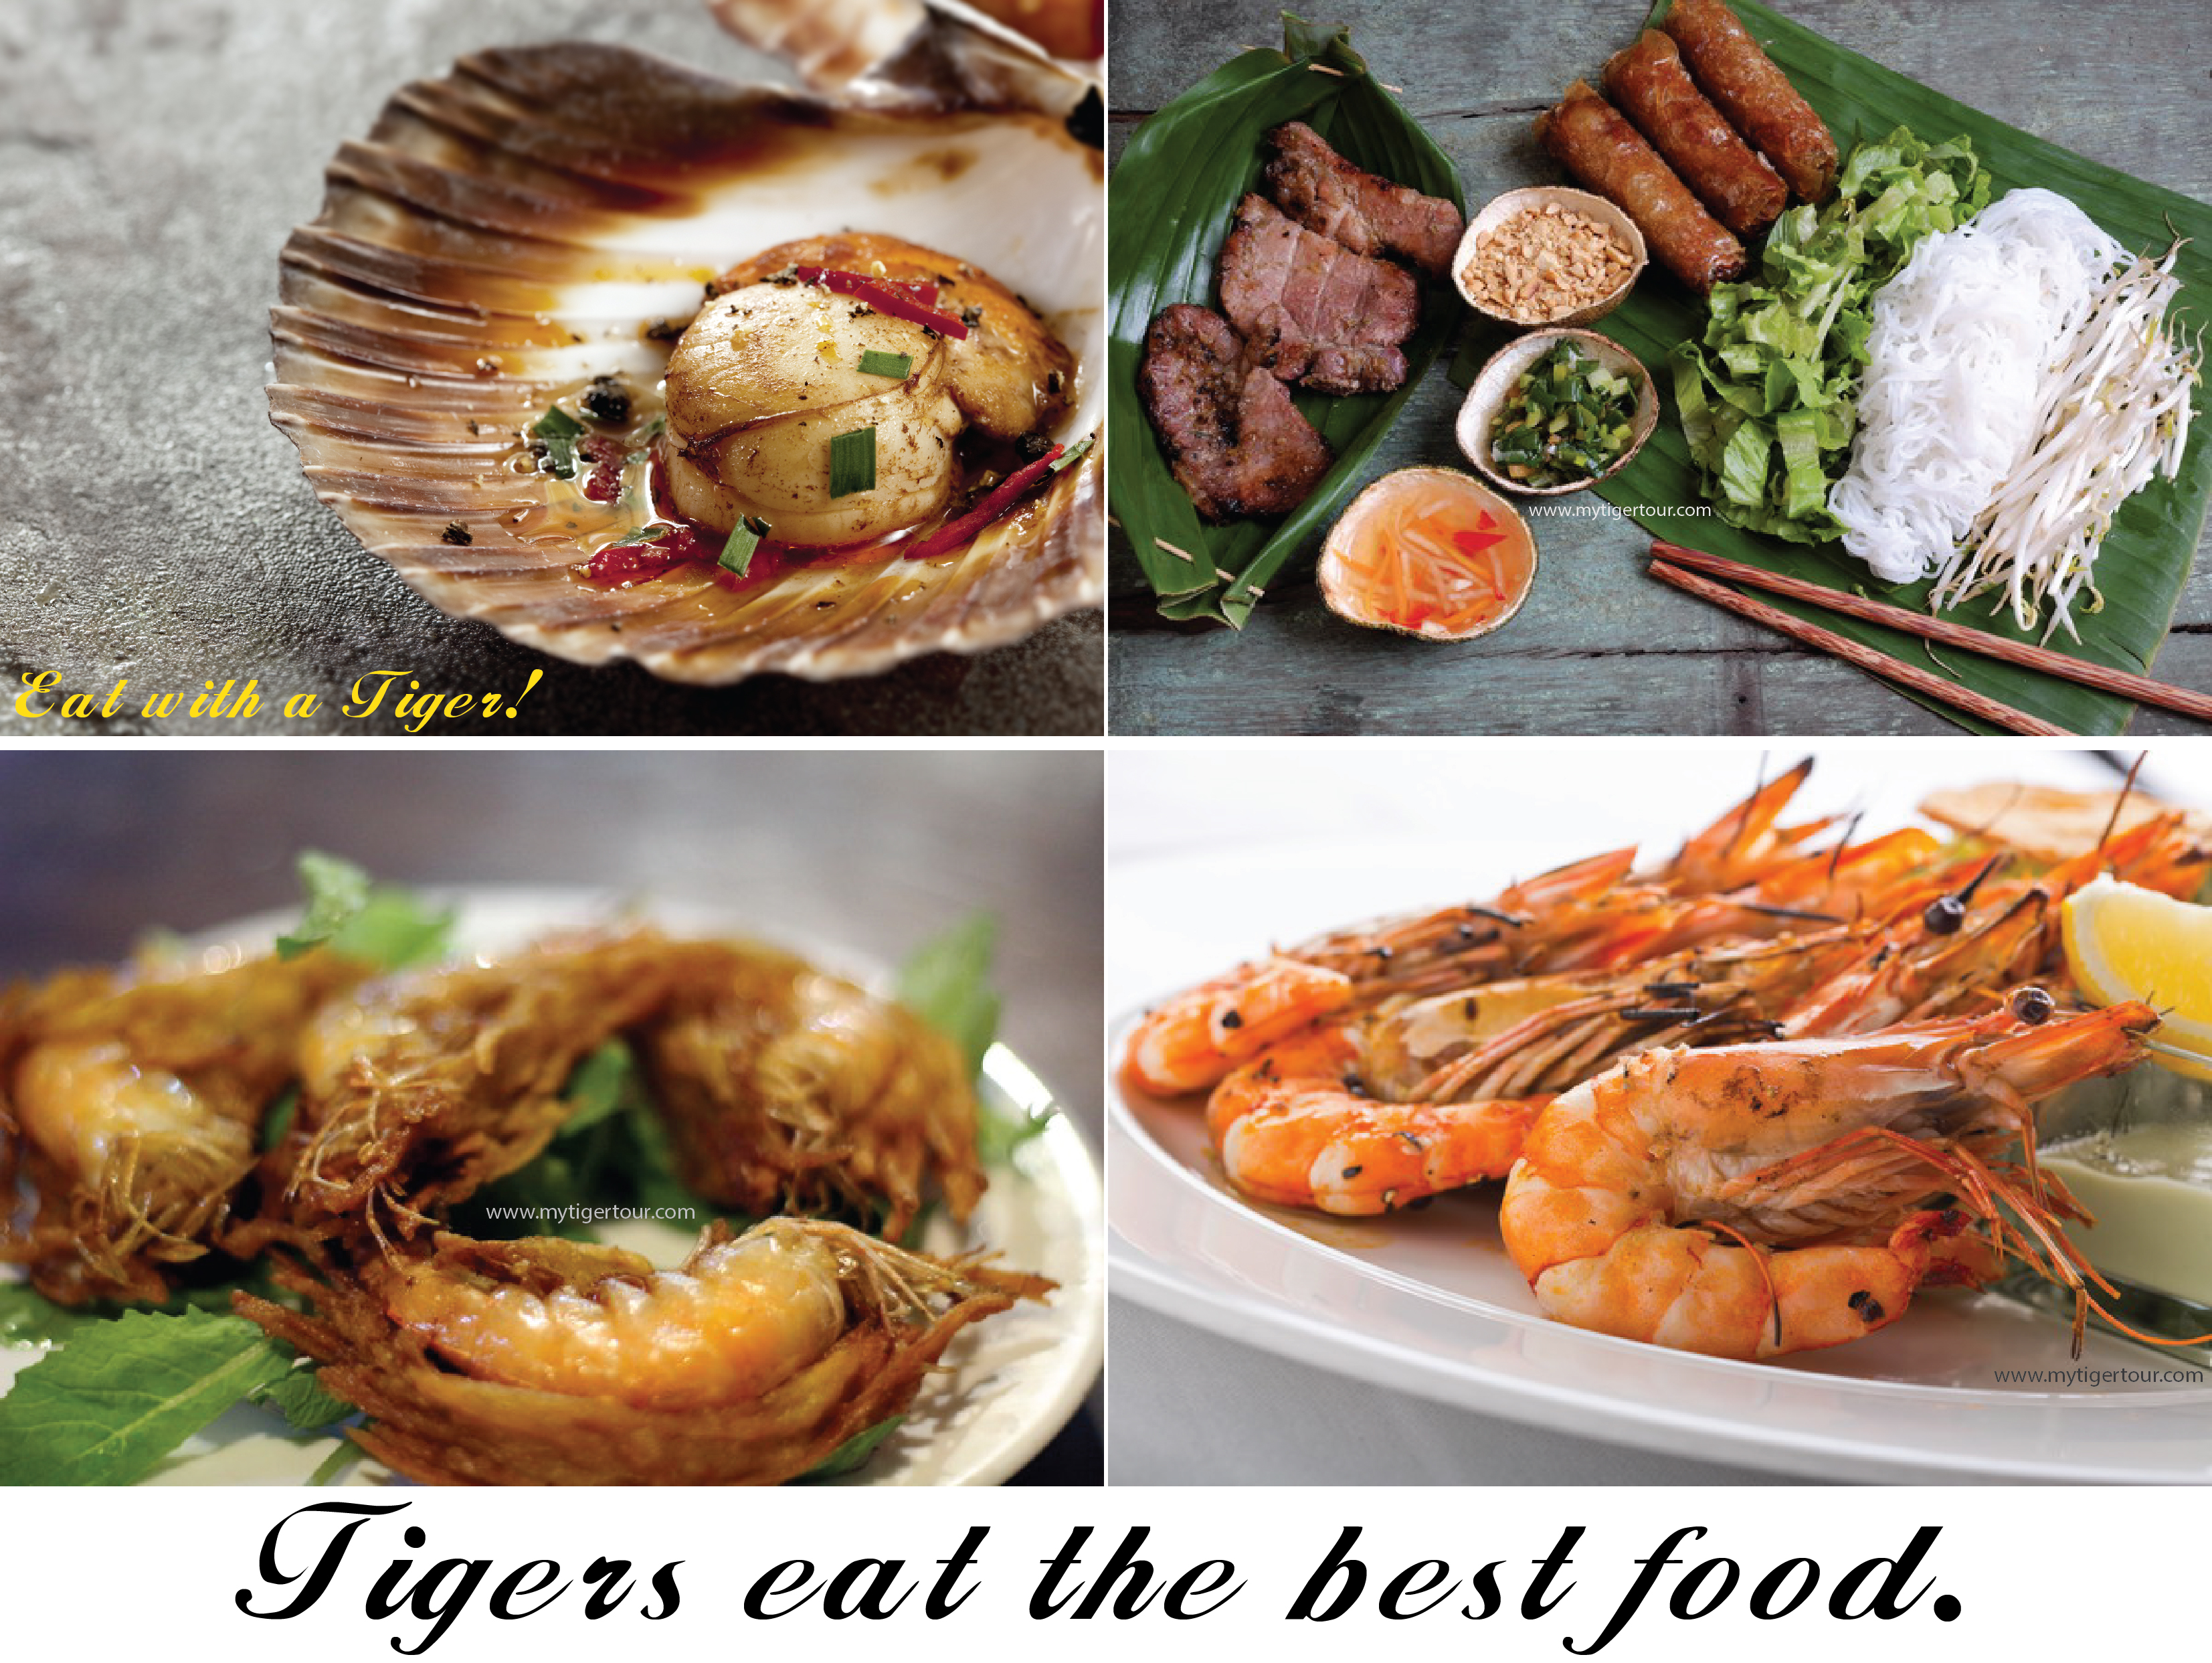 Tigers eat the best food. Eat with a Tiger!